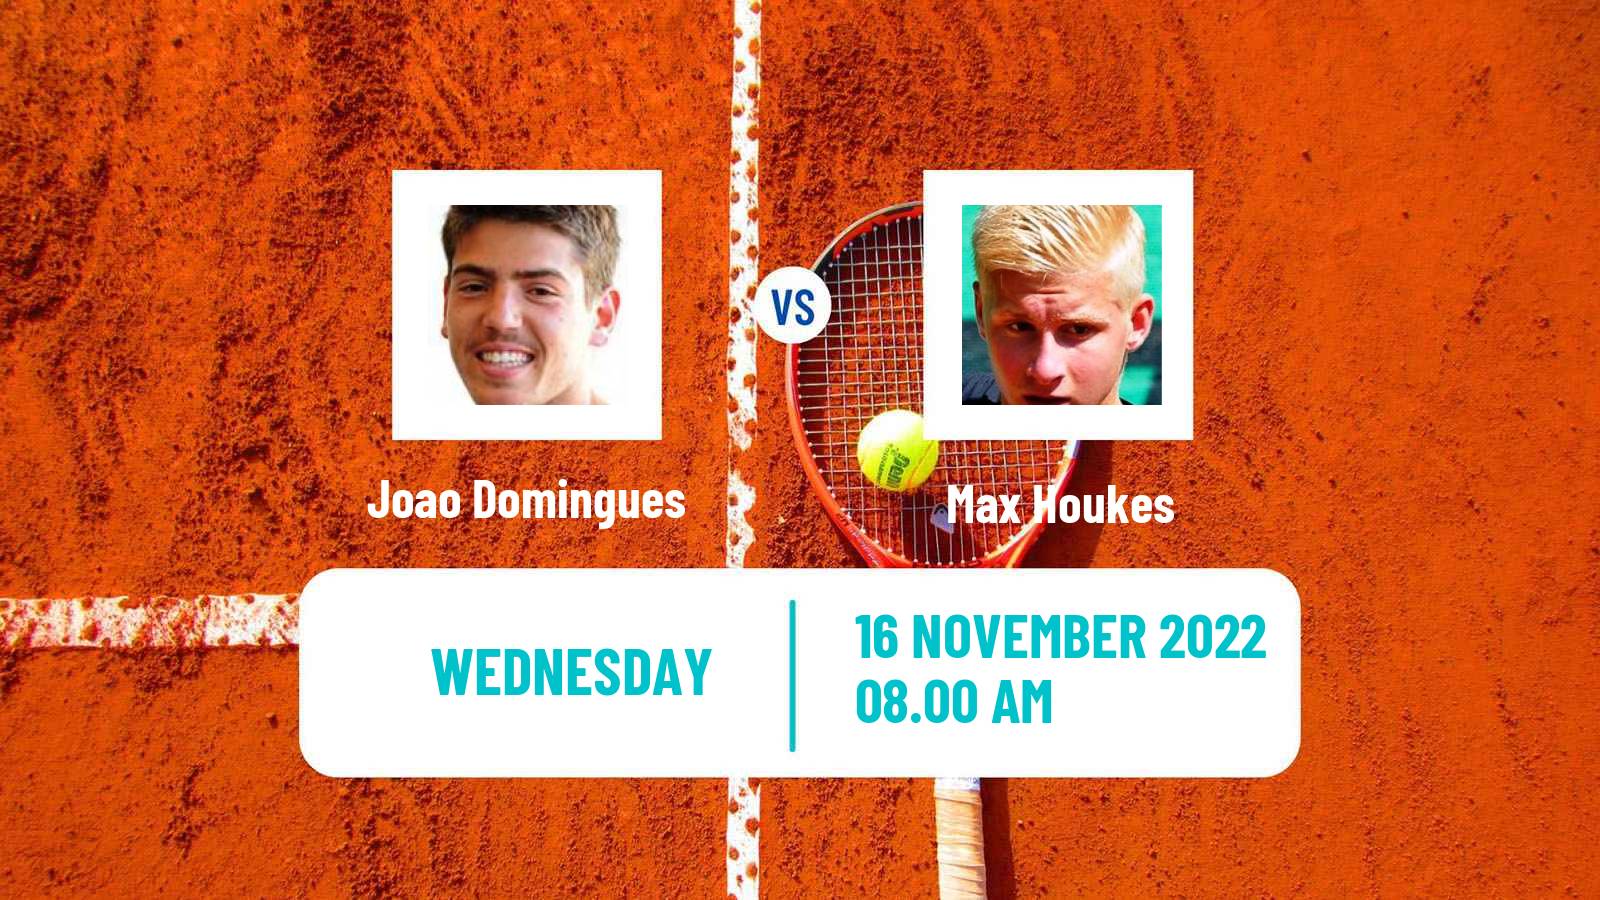 Tennis ATP Challenger Joao Domingues - Max Houkes